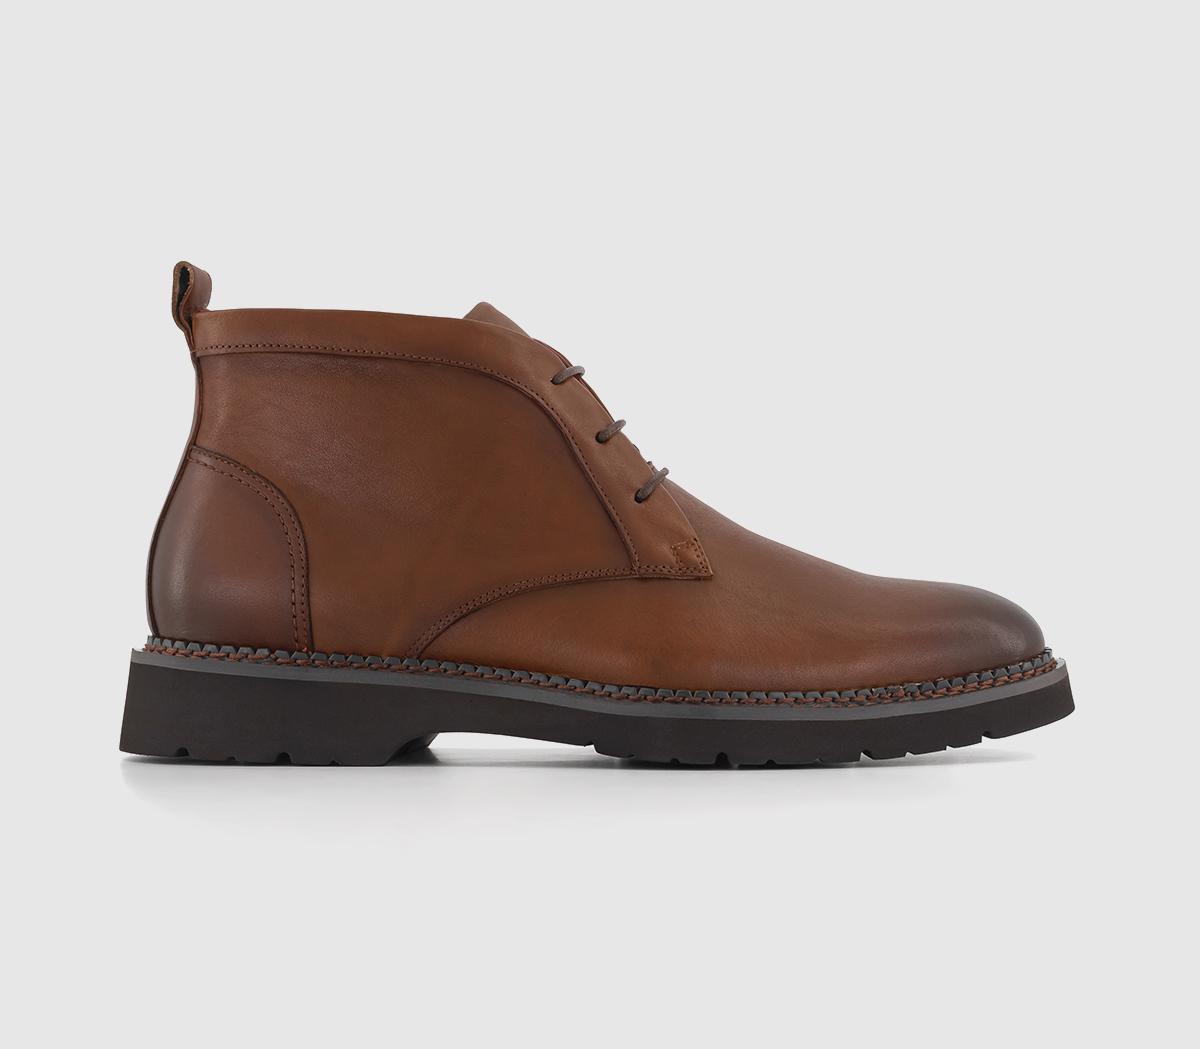 PostePetersham Contrast Outsole Chukka BootsTan Leather